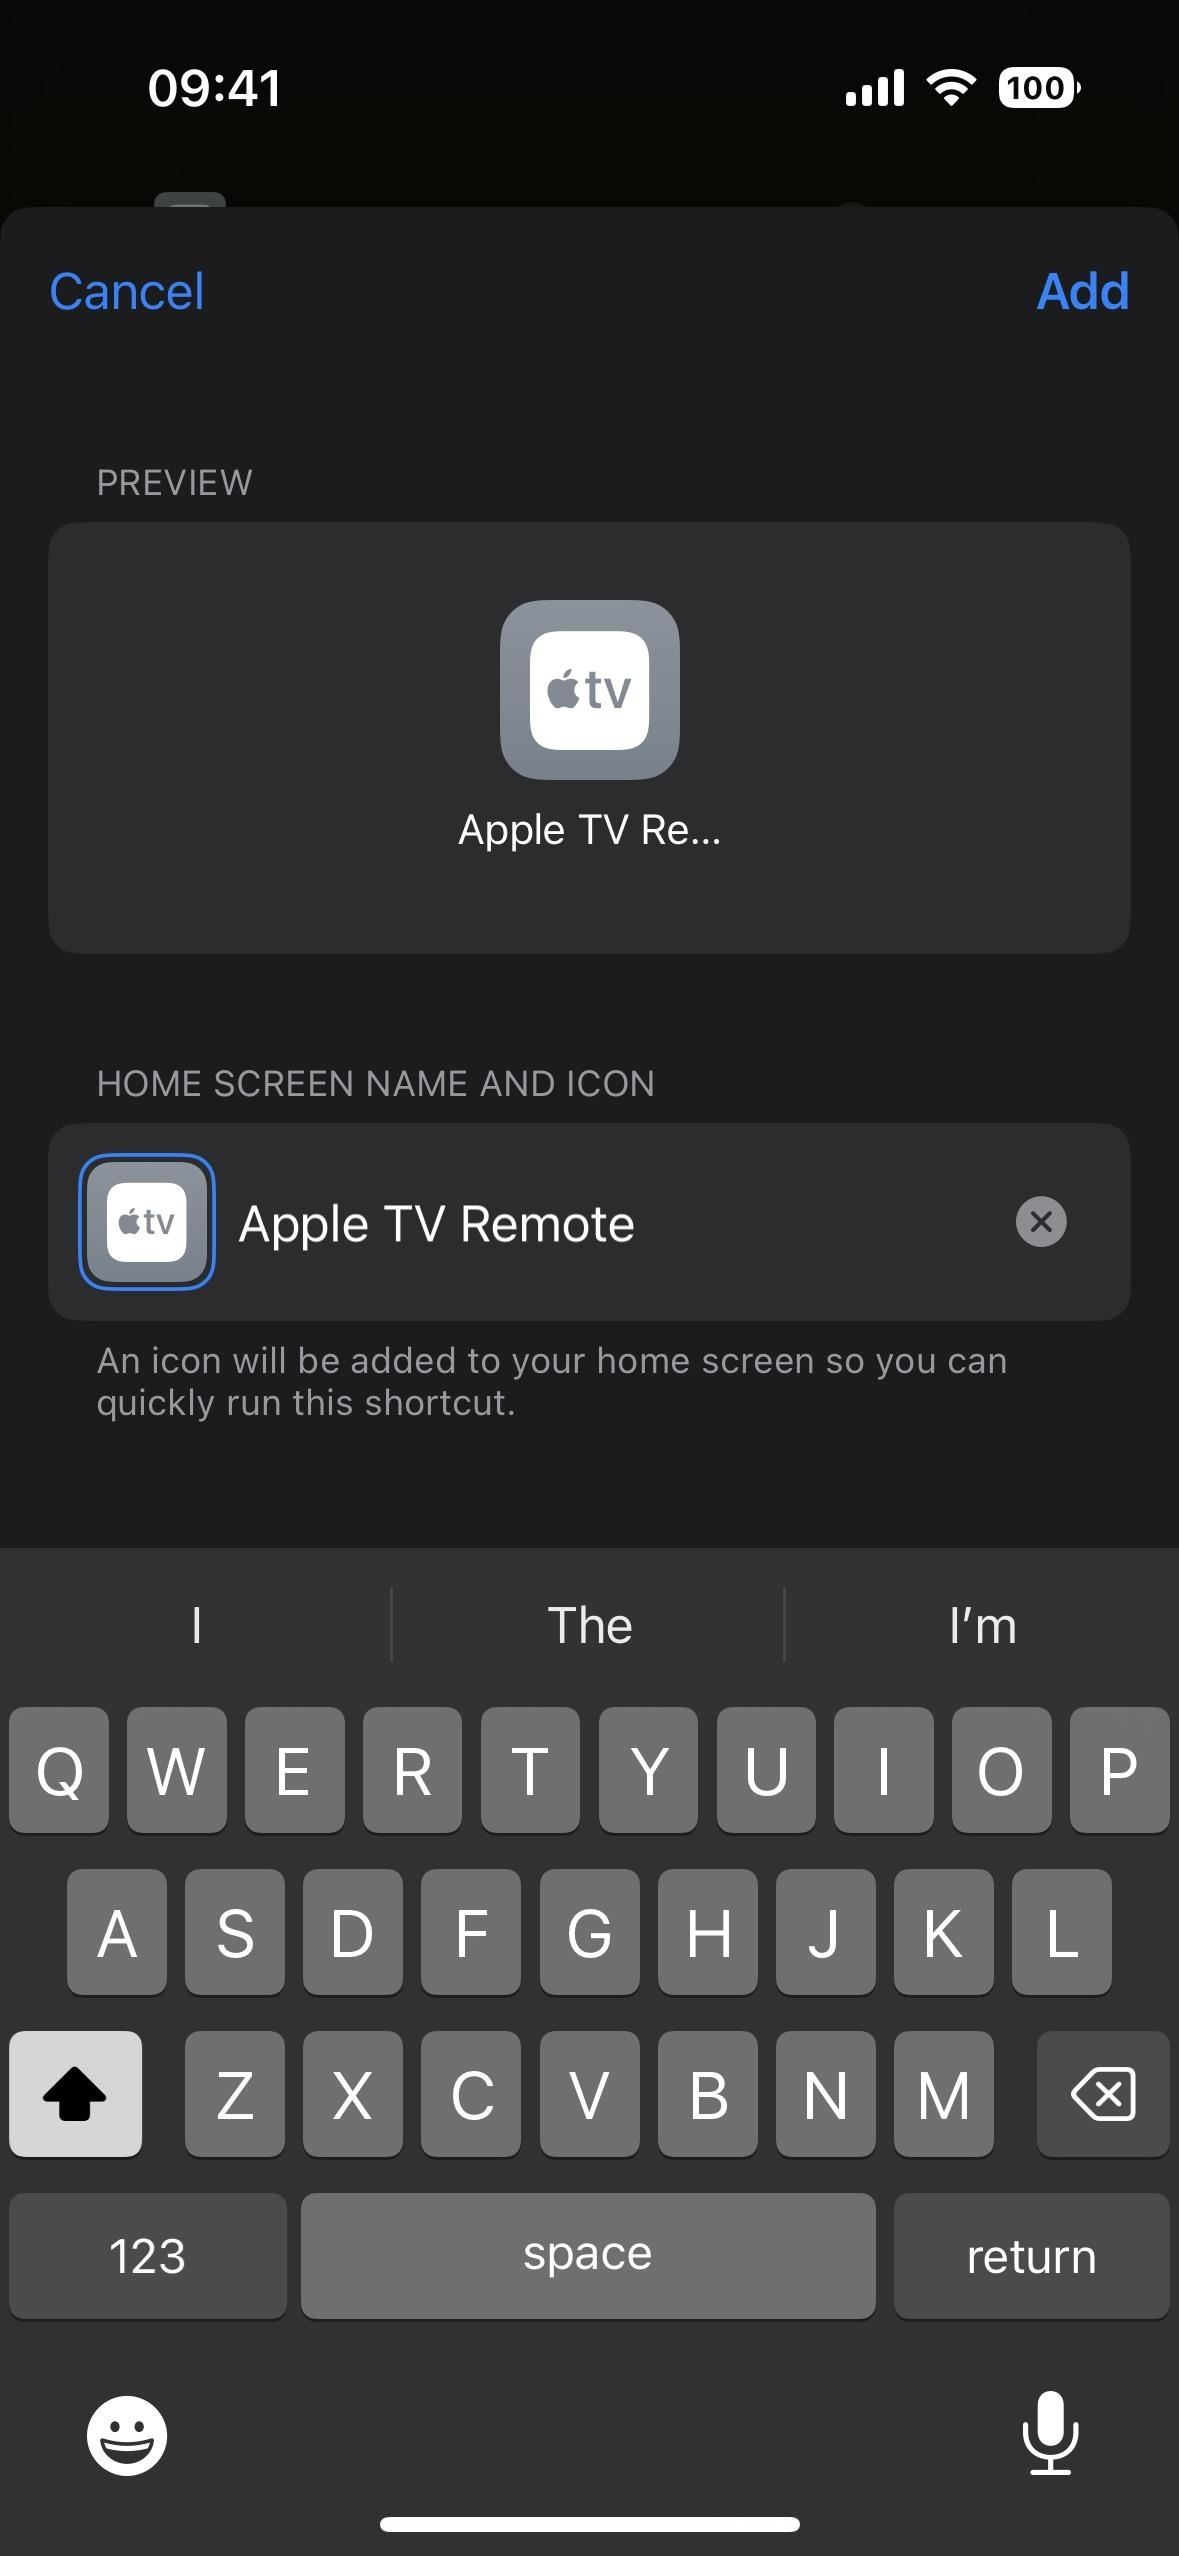 Open your iPhone's secret Apple TV Remote app to the Home screen, App Library, Siri, and more - no Control Center needed